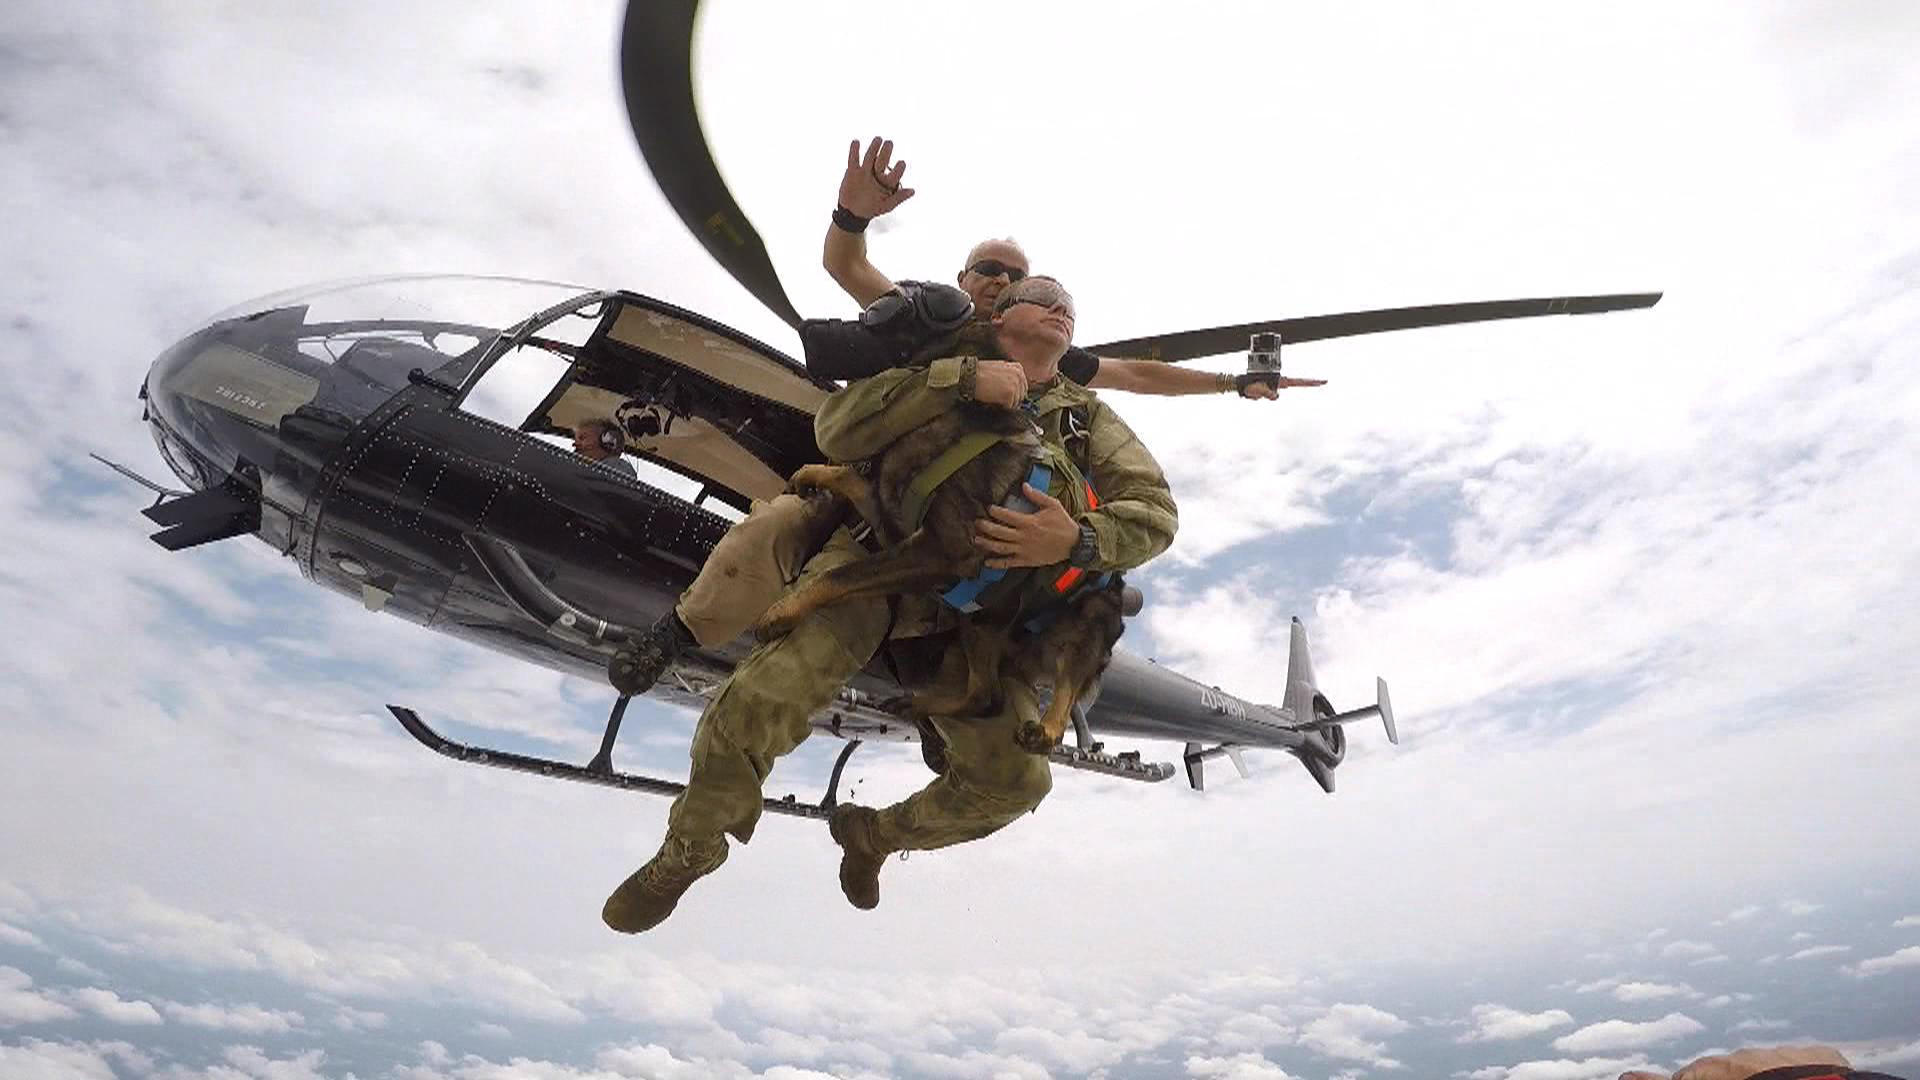 Arrow takes flight Skydiving dogs Pictures CBS News